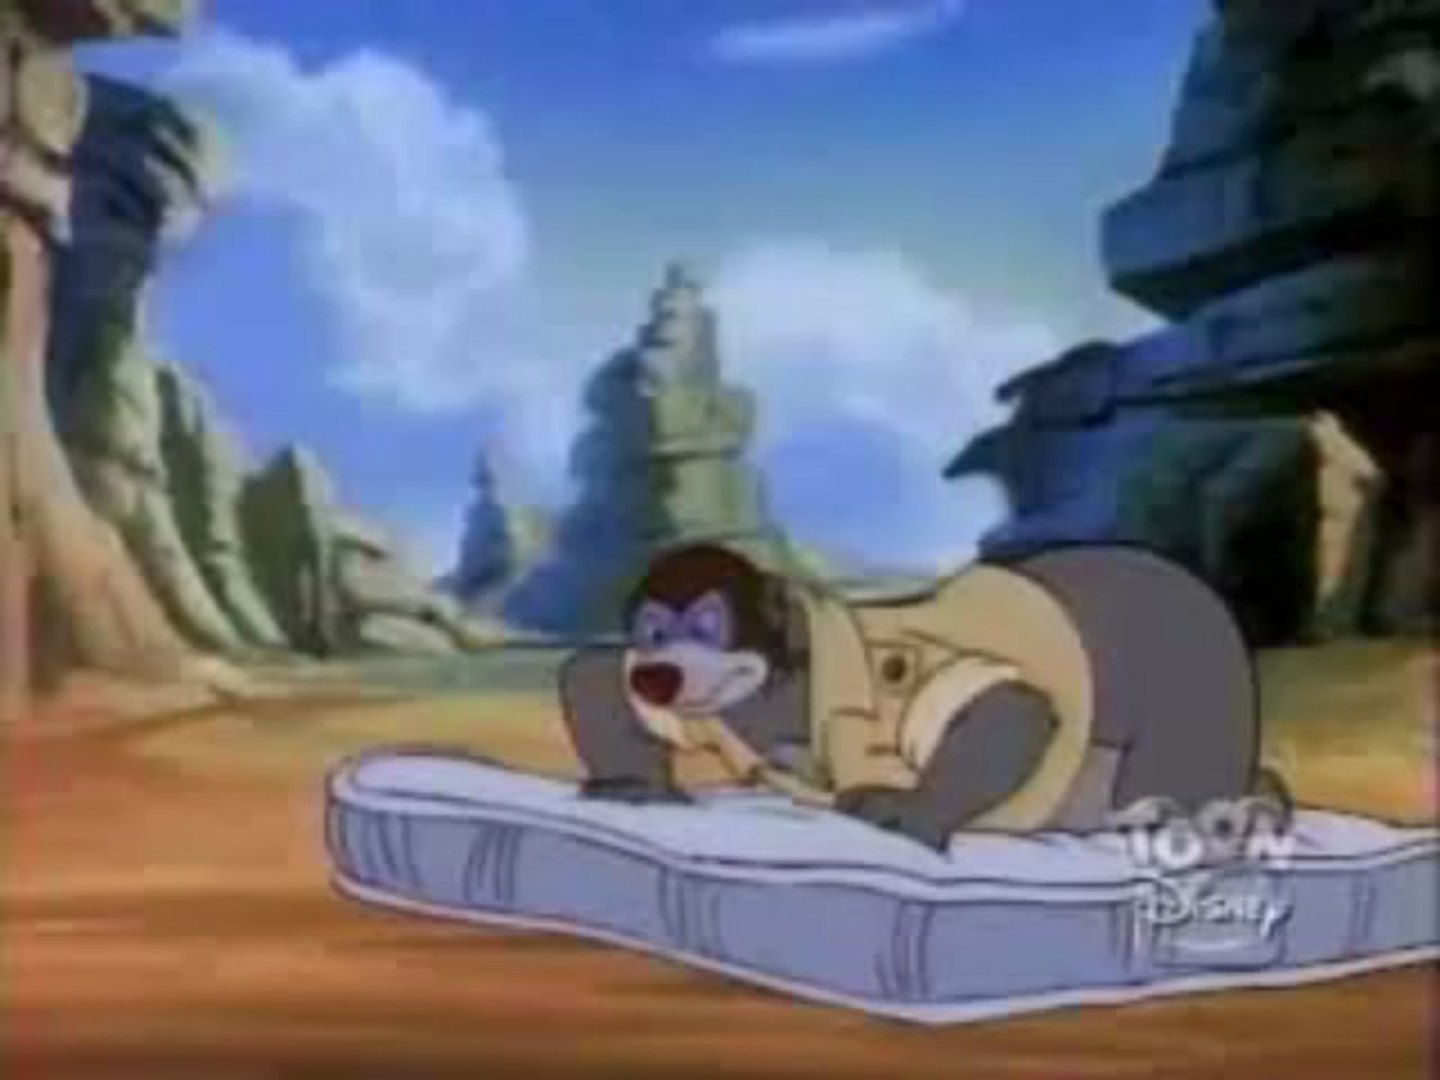 talespin full episodes in hindi free download